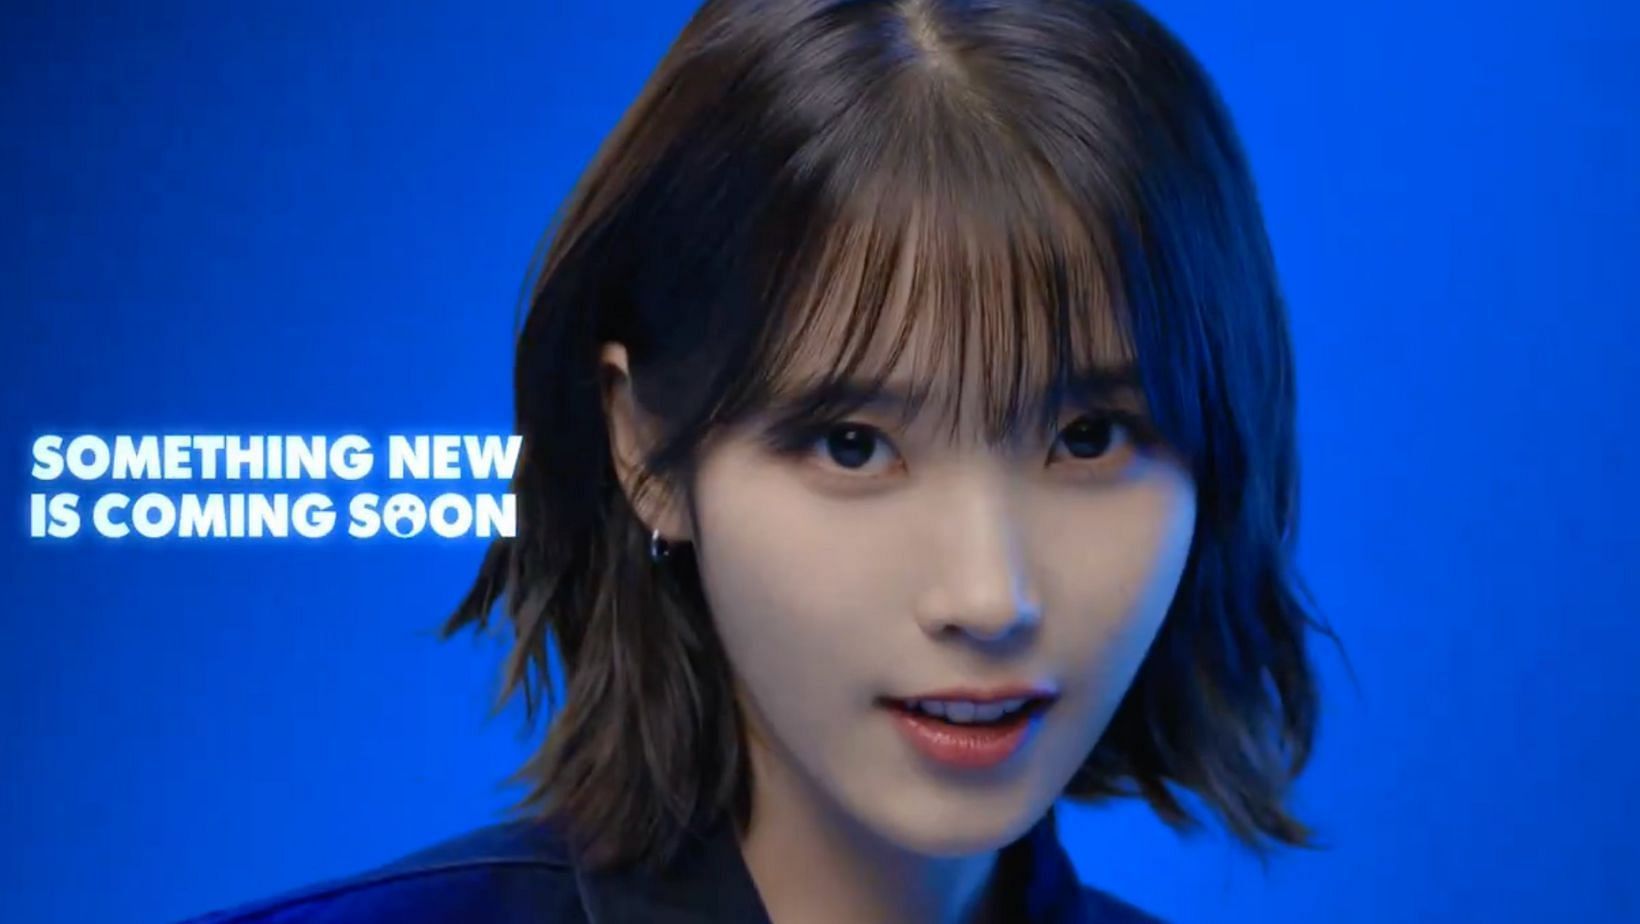 IU teases her upcoming commercial film with 